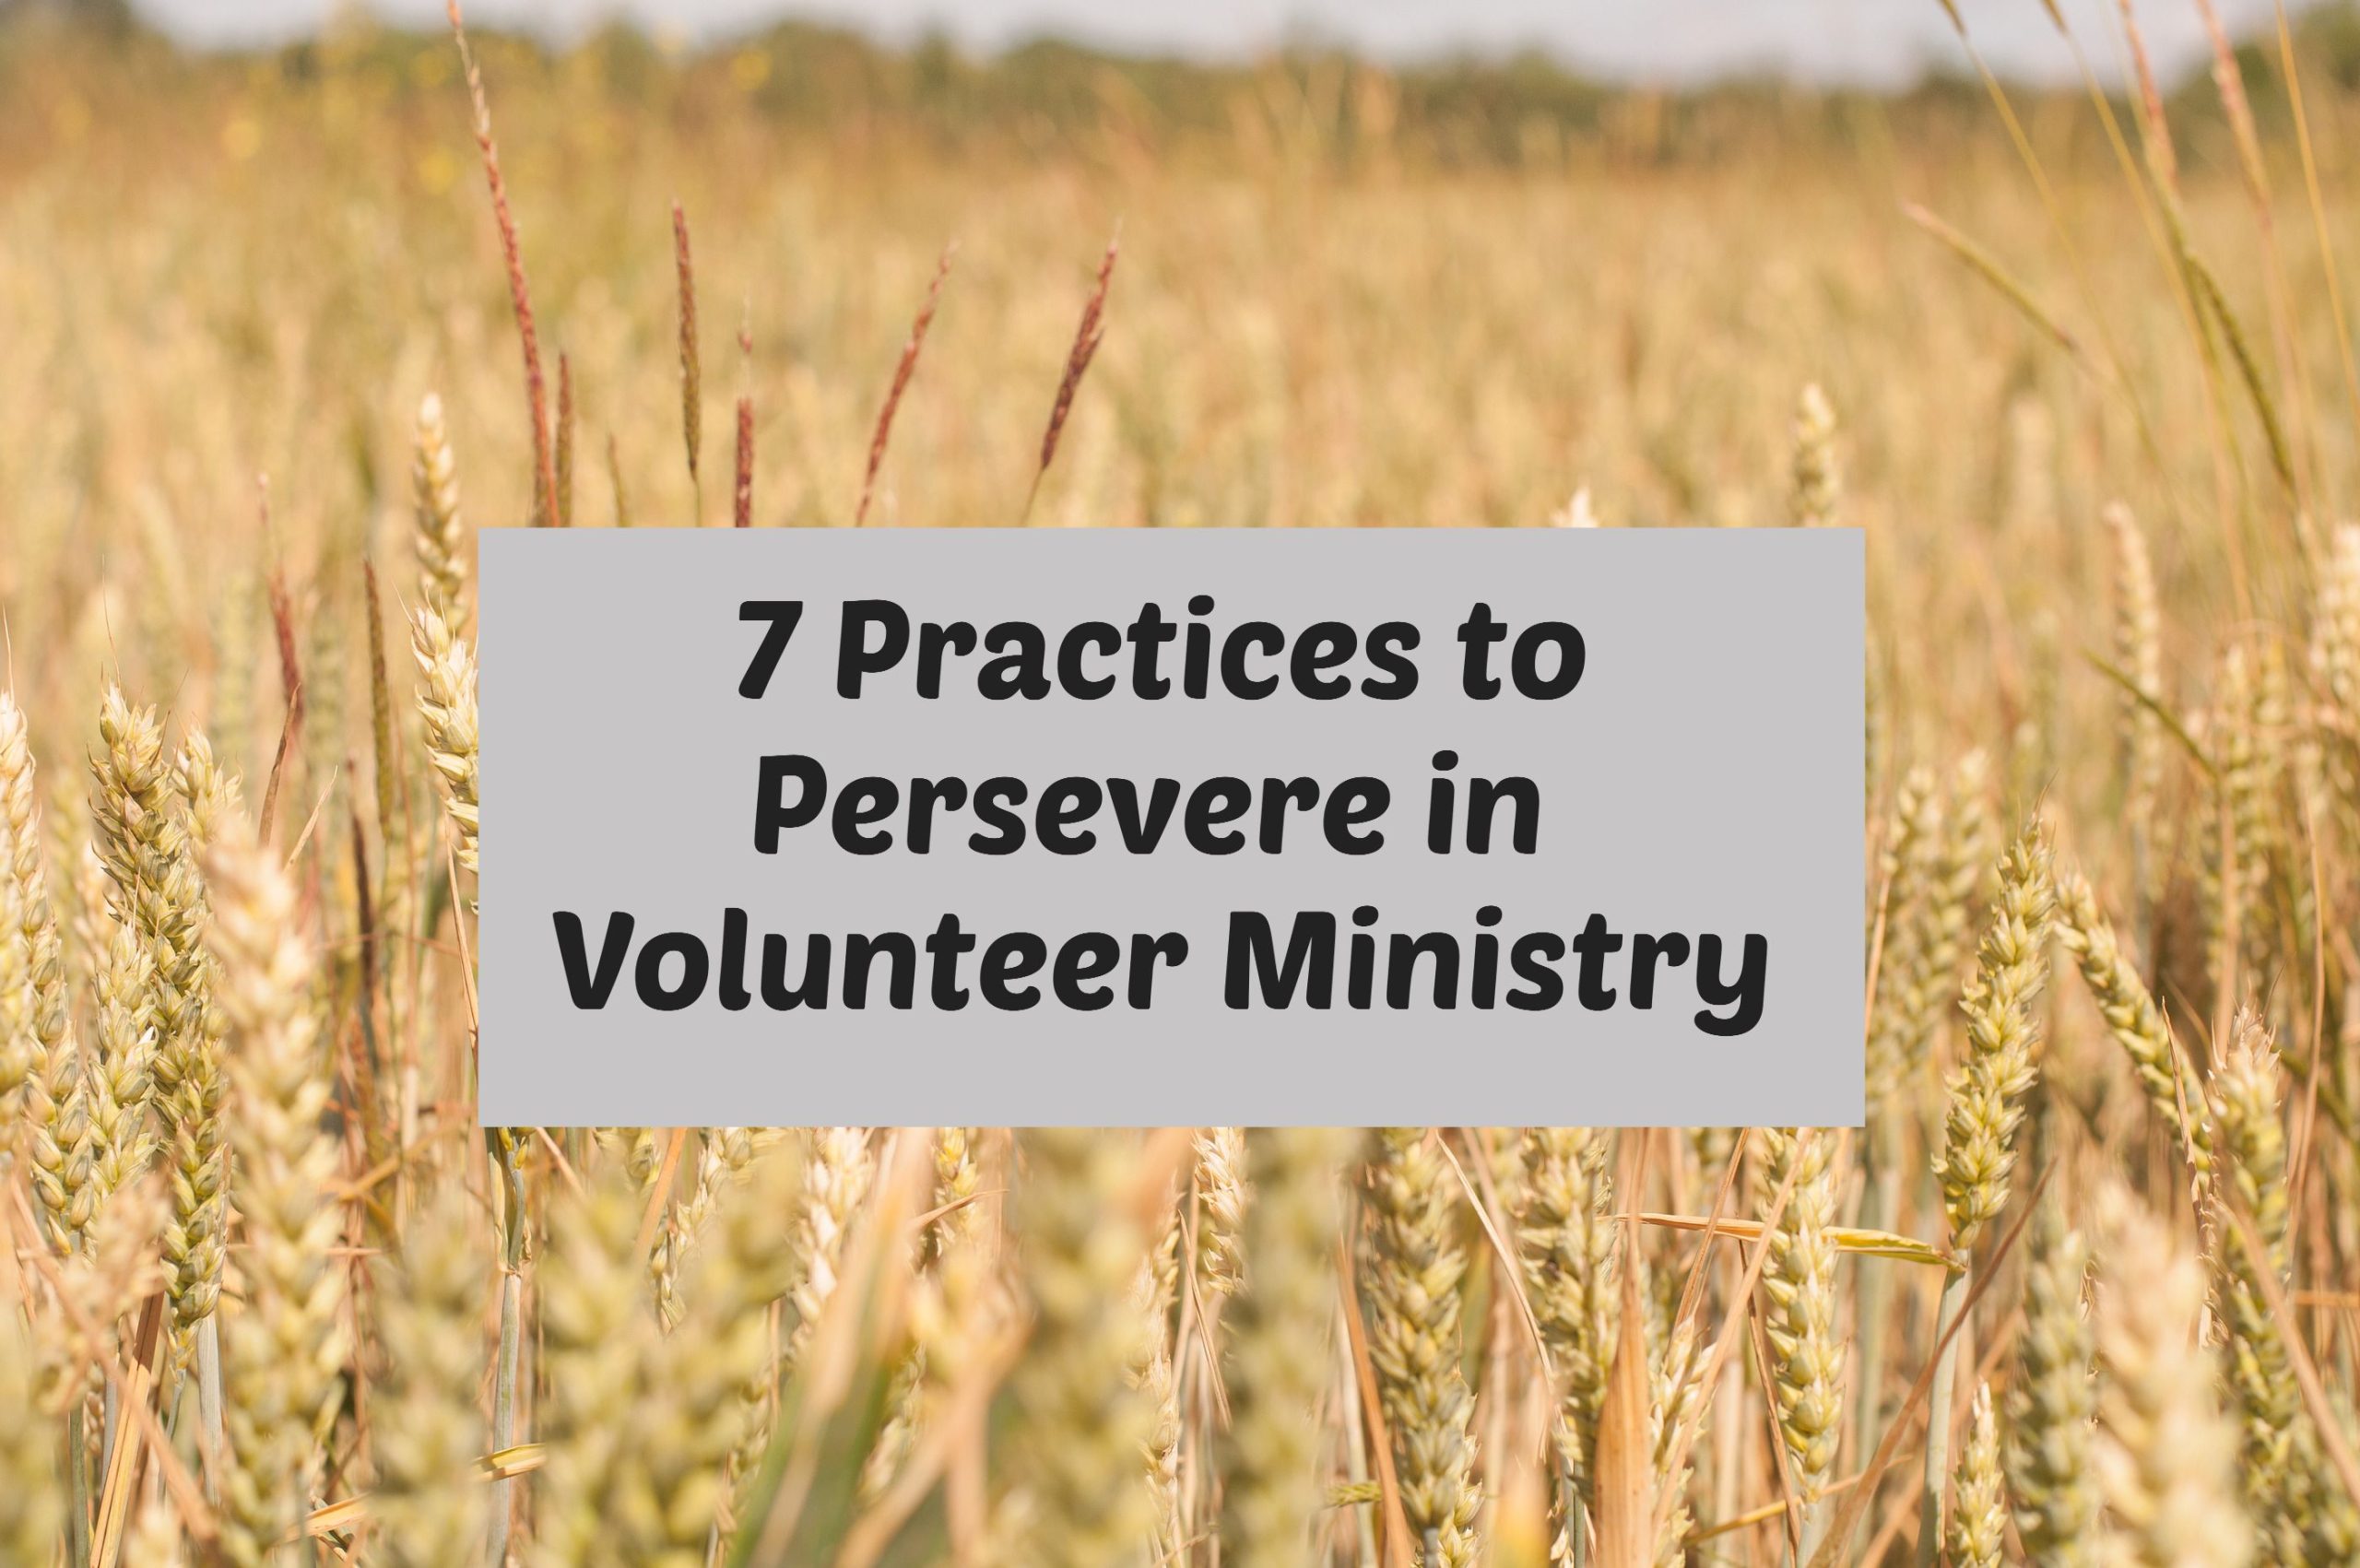 Persevere in ministry